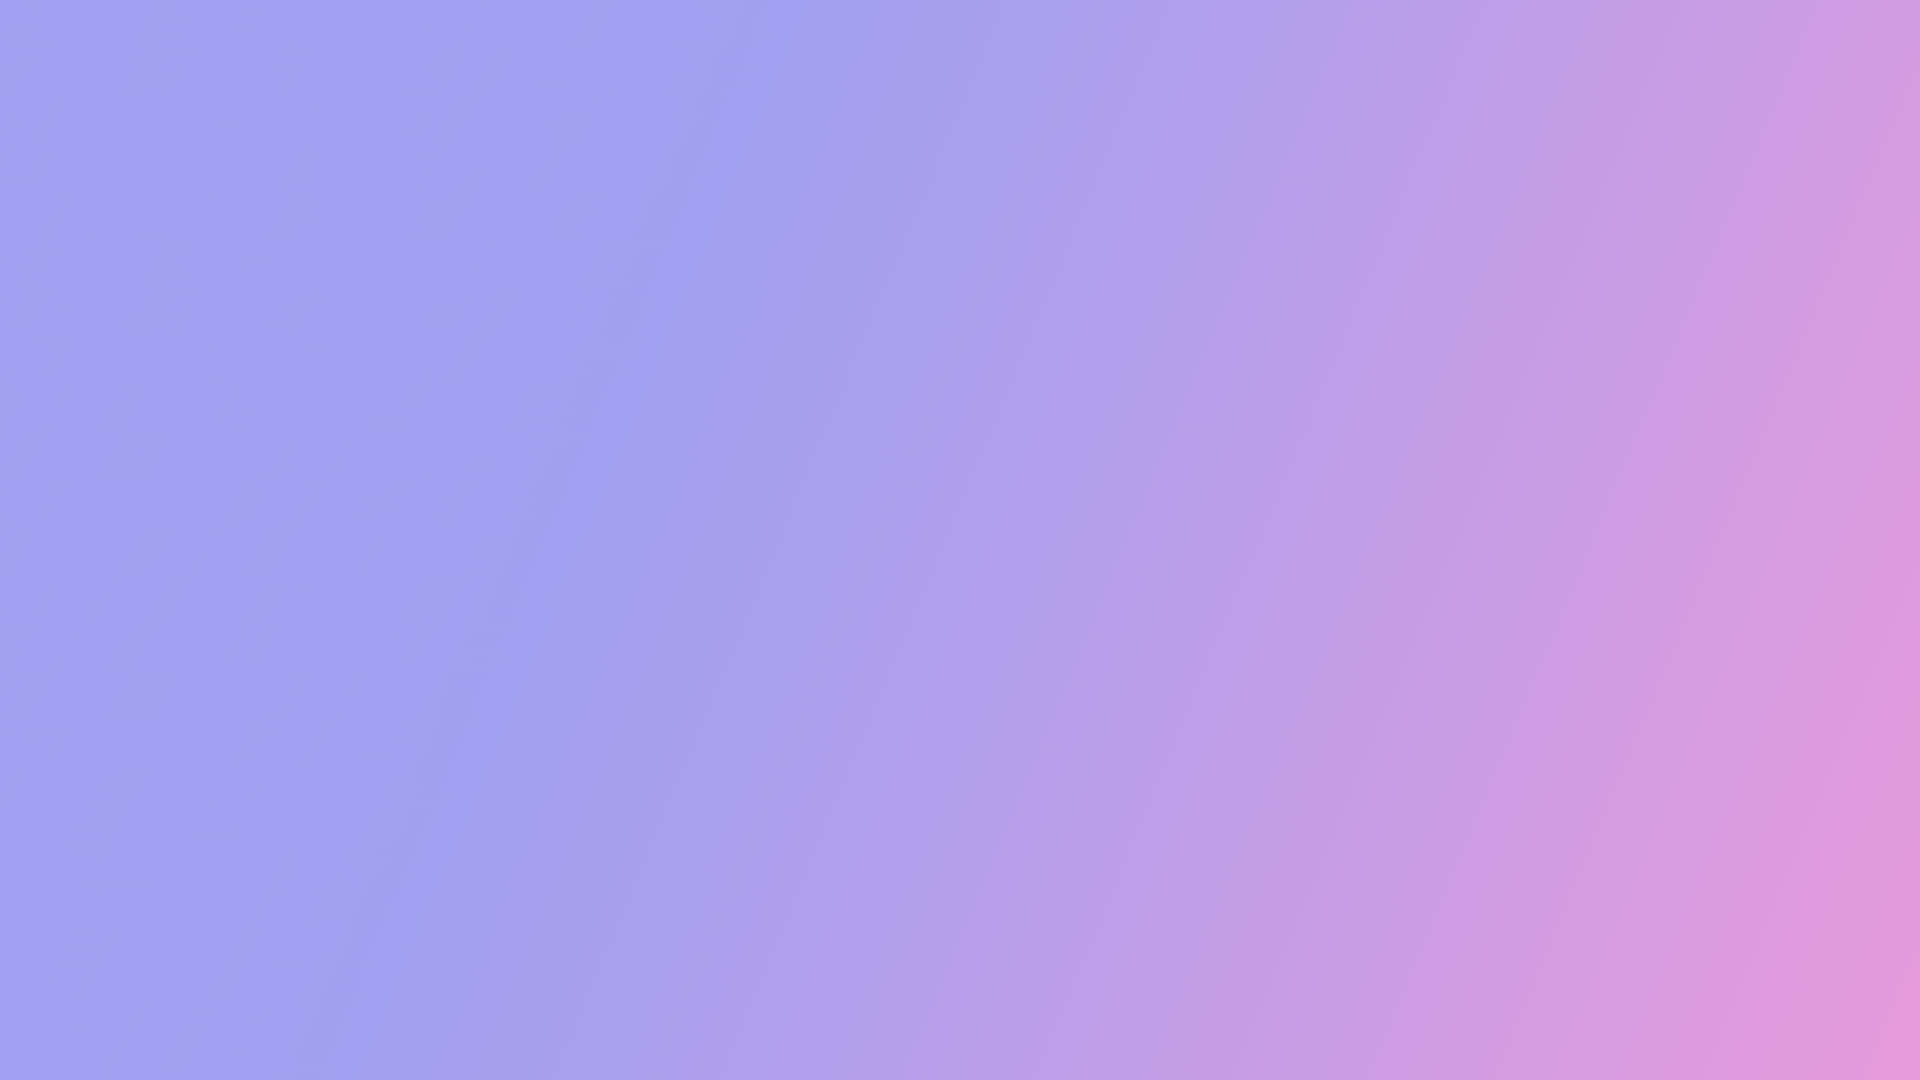 A Pink And Purple Gradient Wallpaper Wallpaper